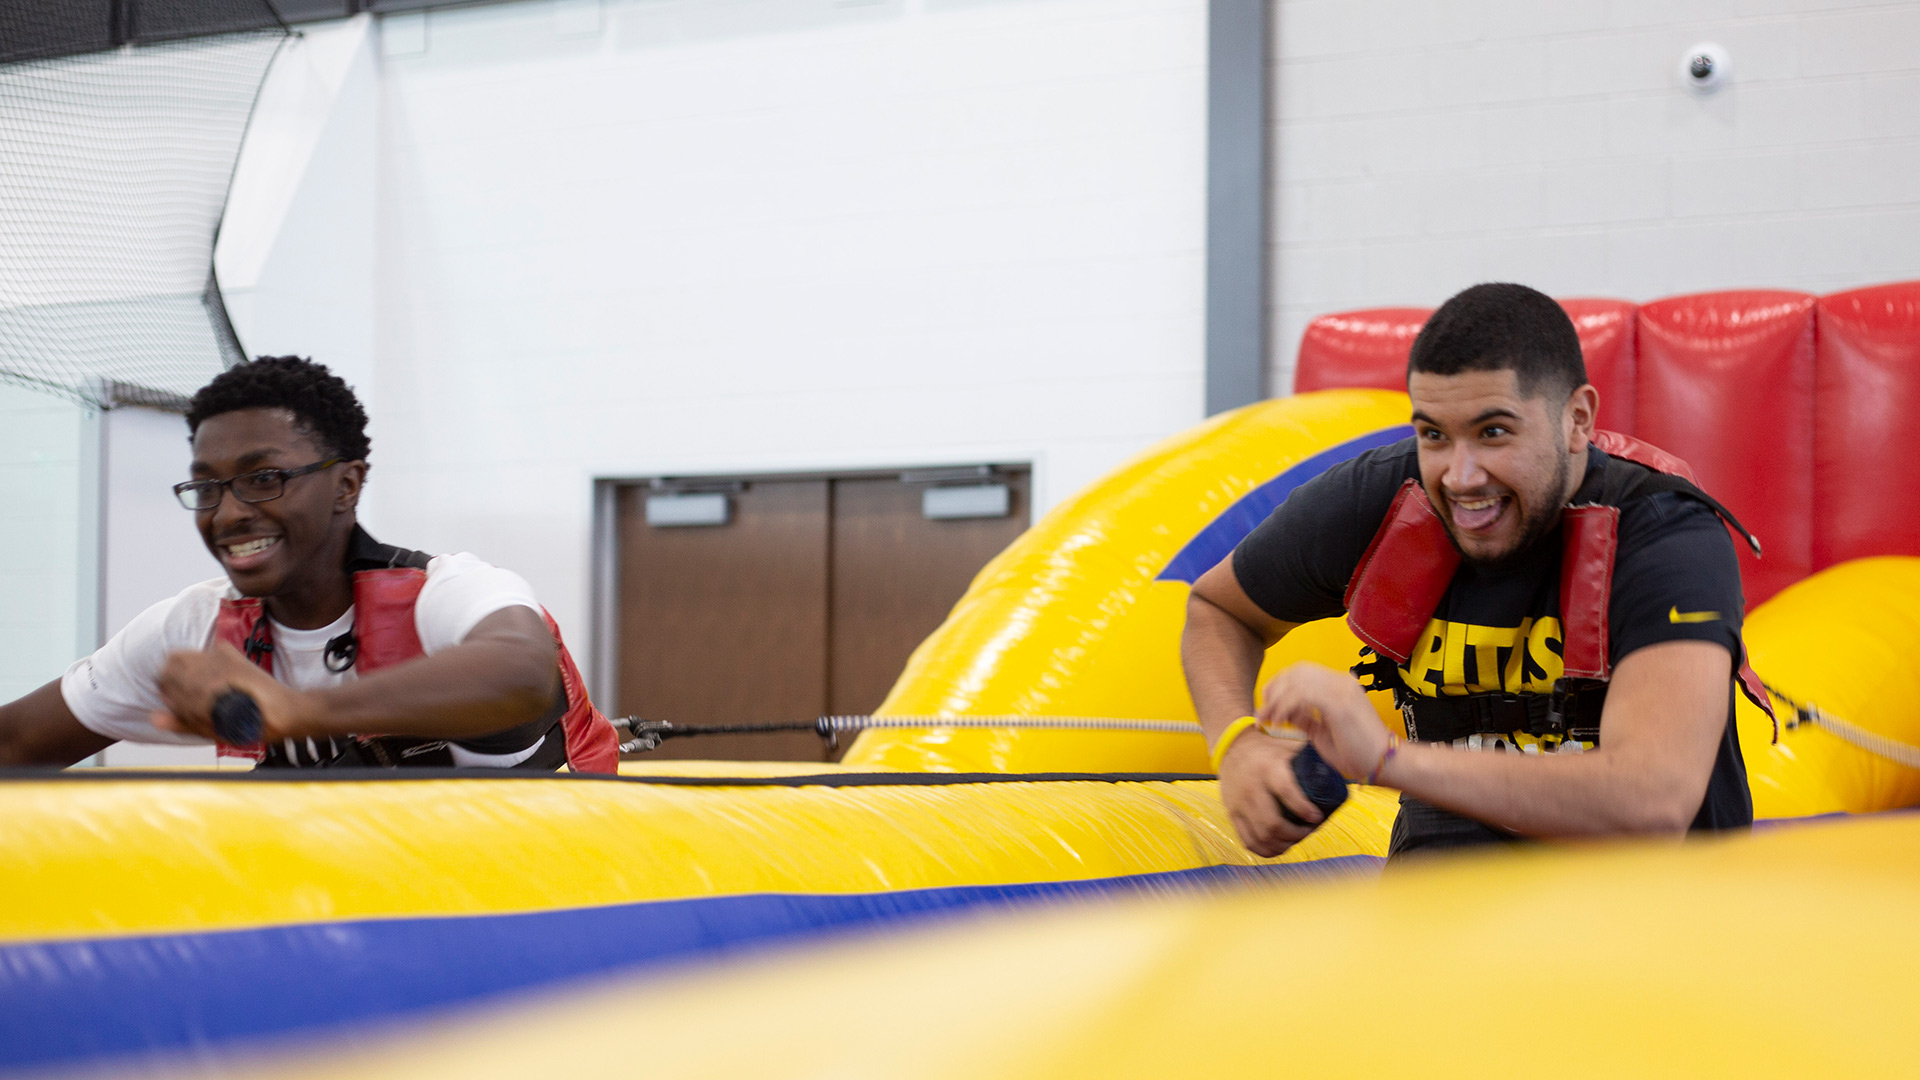 Two students pulling ropes in an inflatable game